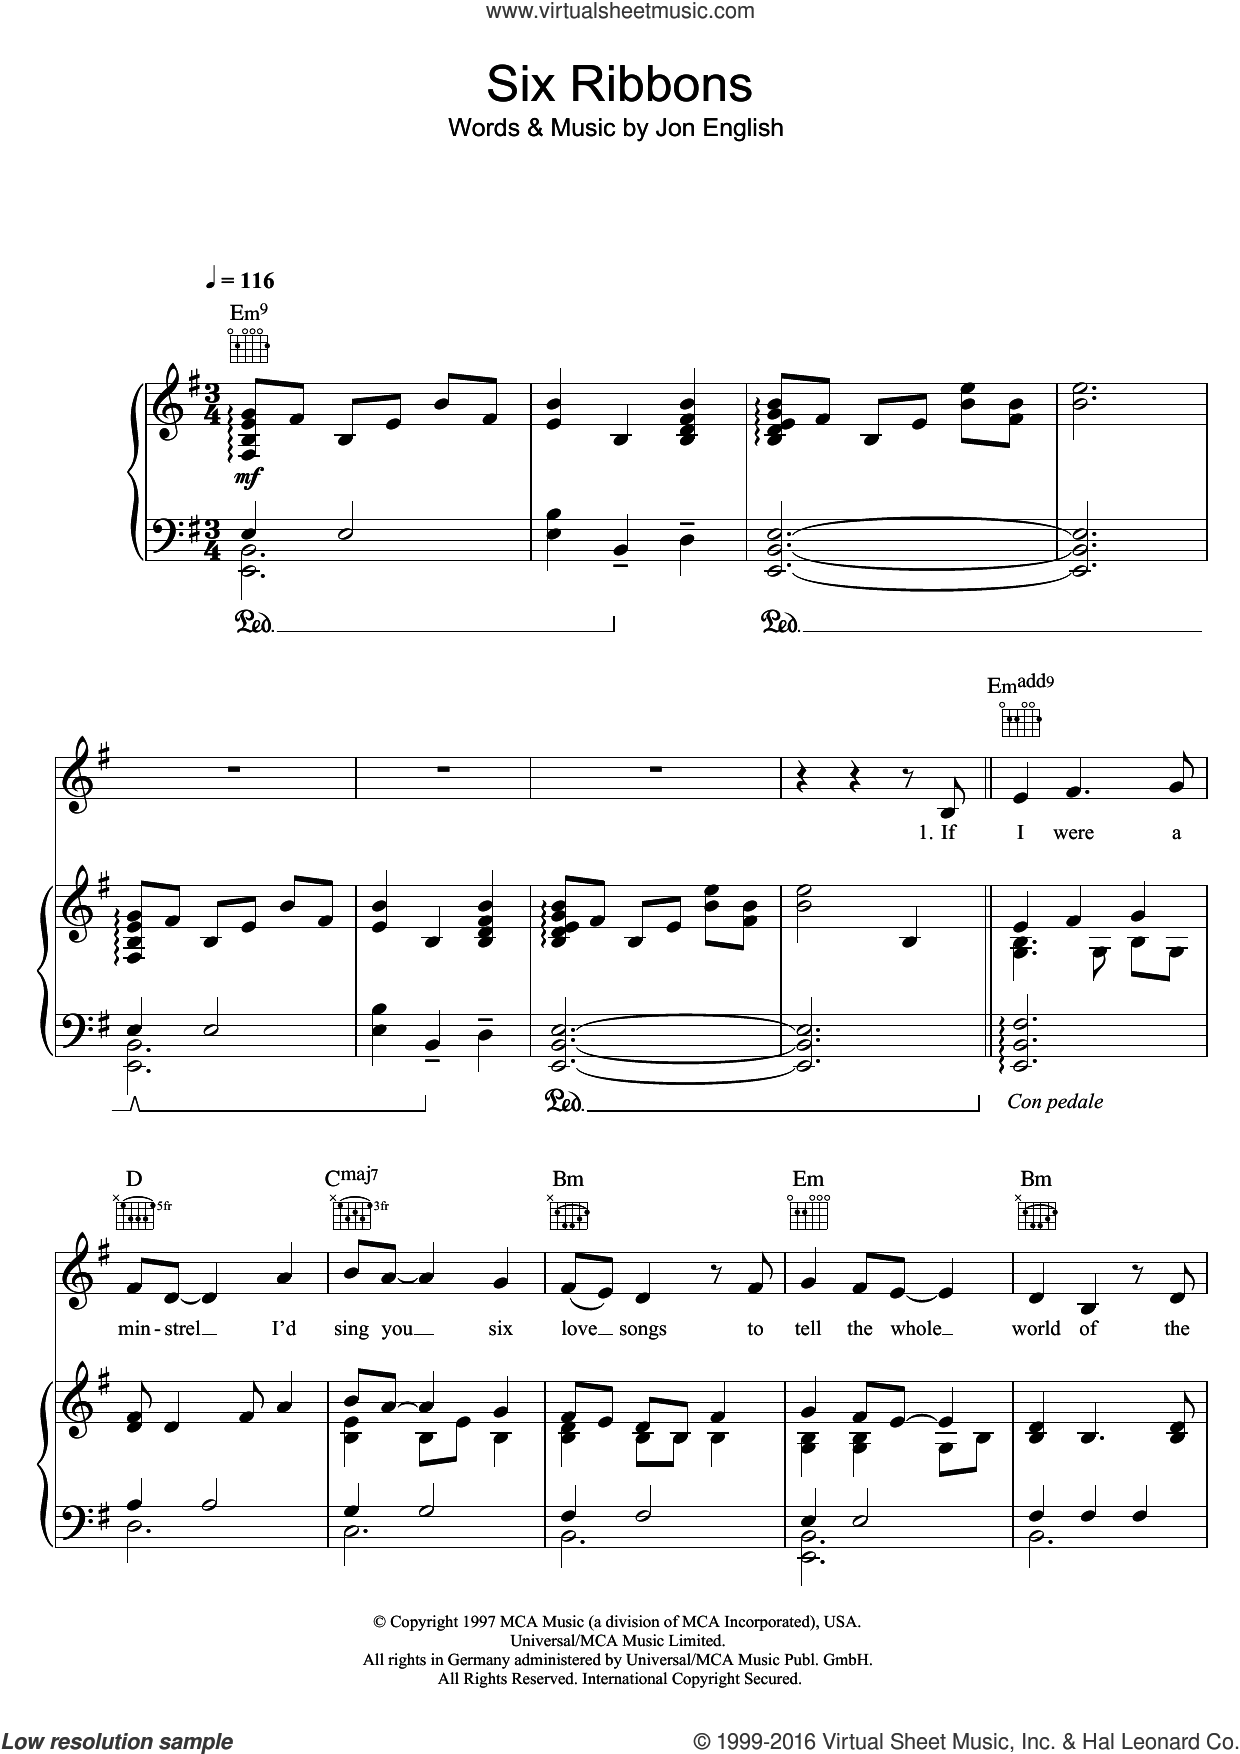 English - Six Ribbons sheet music for voice, piano or guitar